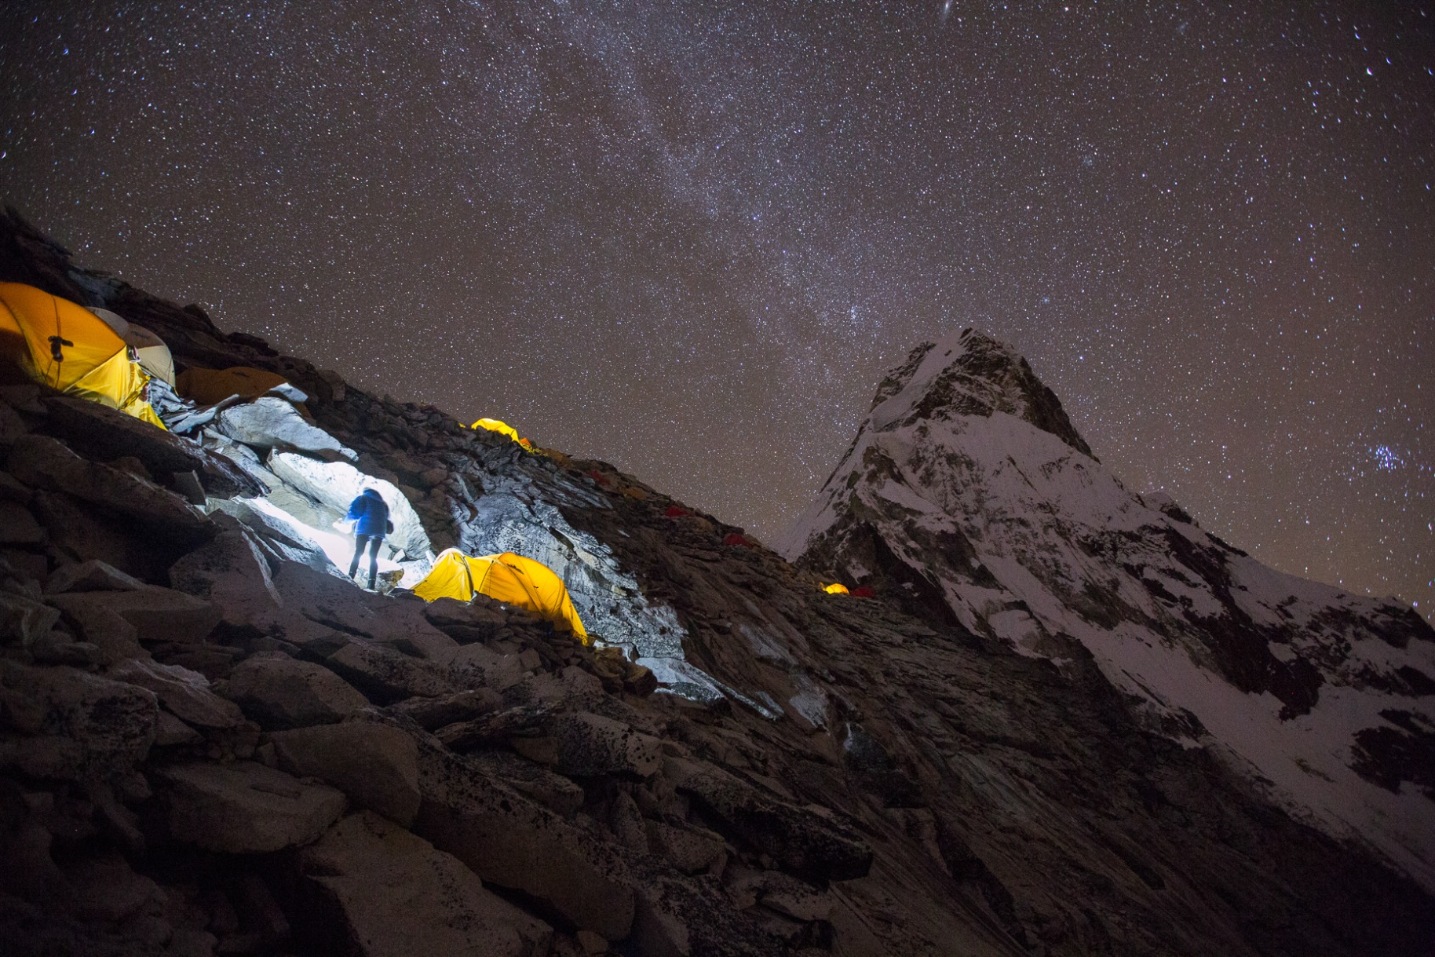 Ama Dablam high camp tents illuminated at night with a starry night sky